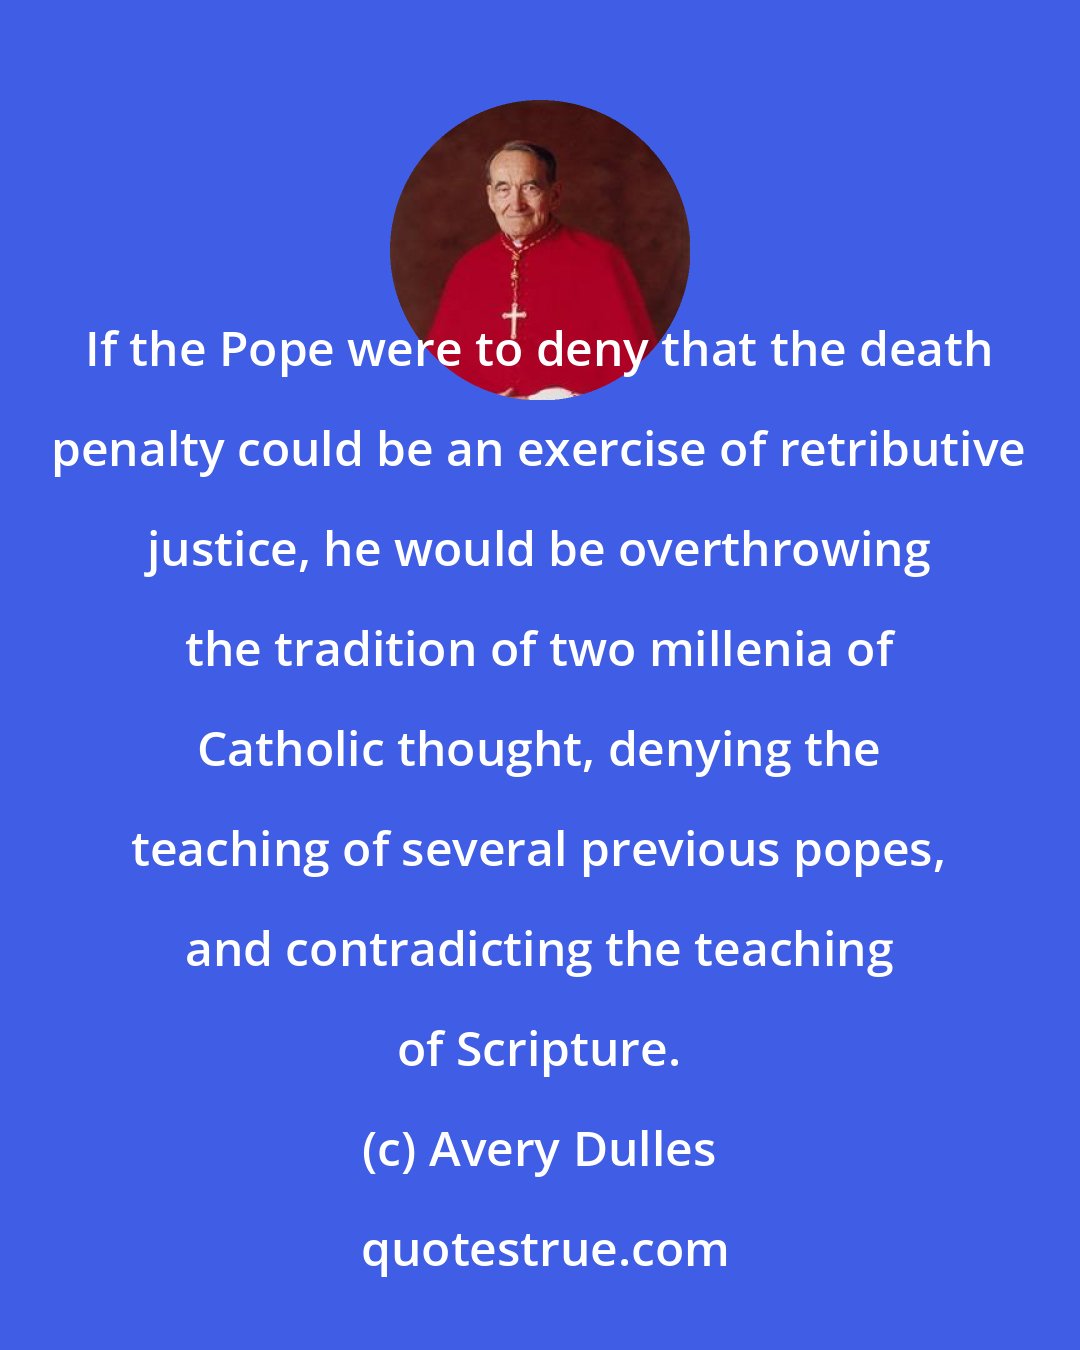 Avery Dulles: If the Pope were to deny that the death penalty could be an exercise of retributive justice, he would be overthrowing the tradition of two millenia of Catholic thought, denying the teaching of several previous popes, and contradicting the teaching of Scripture.